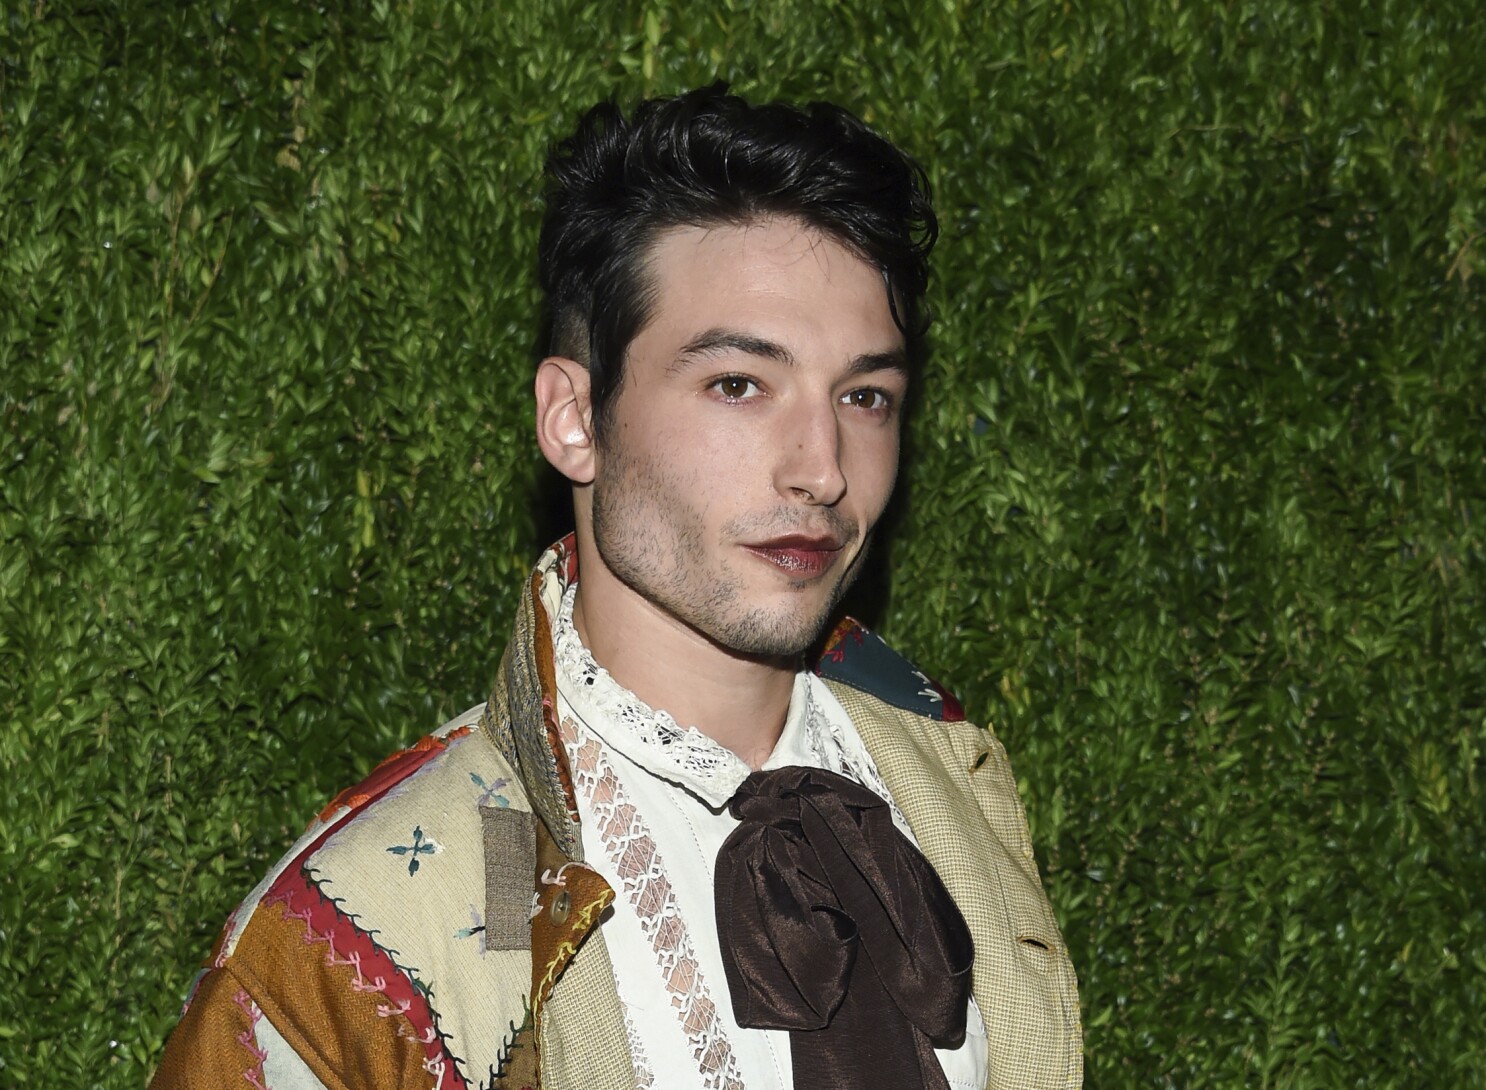 Court 'cannot locate or serve' Ezra Miller in grooming case - Los Angeles Times